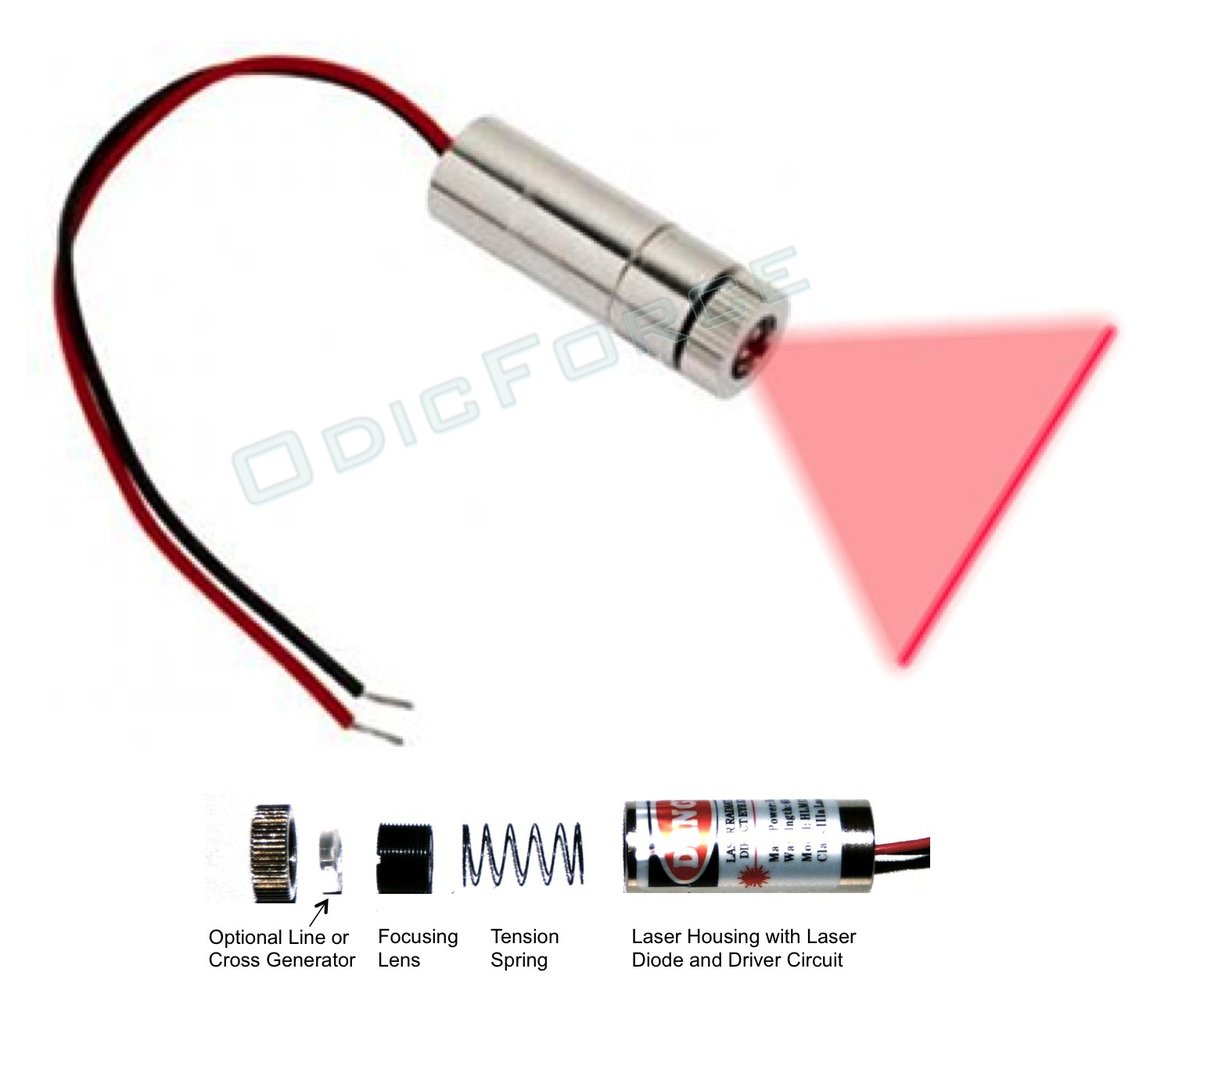 5mW Adjustable Focus Laser Module with Line Pattern 110 Degree Fan Angle (12mm)